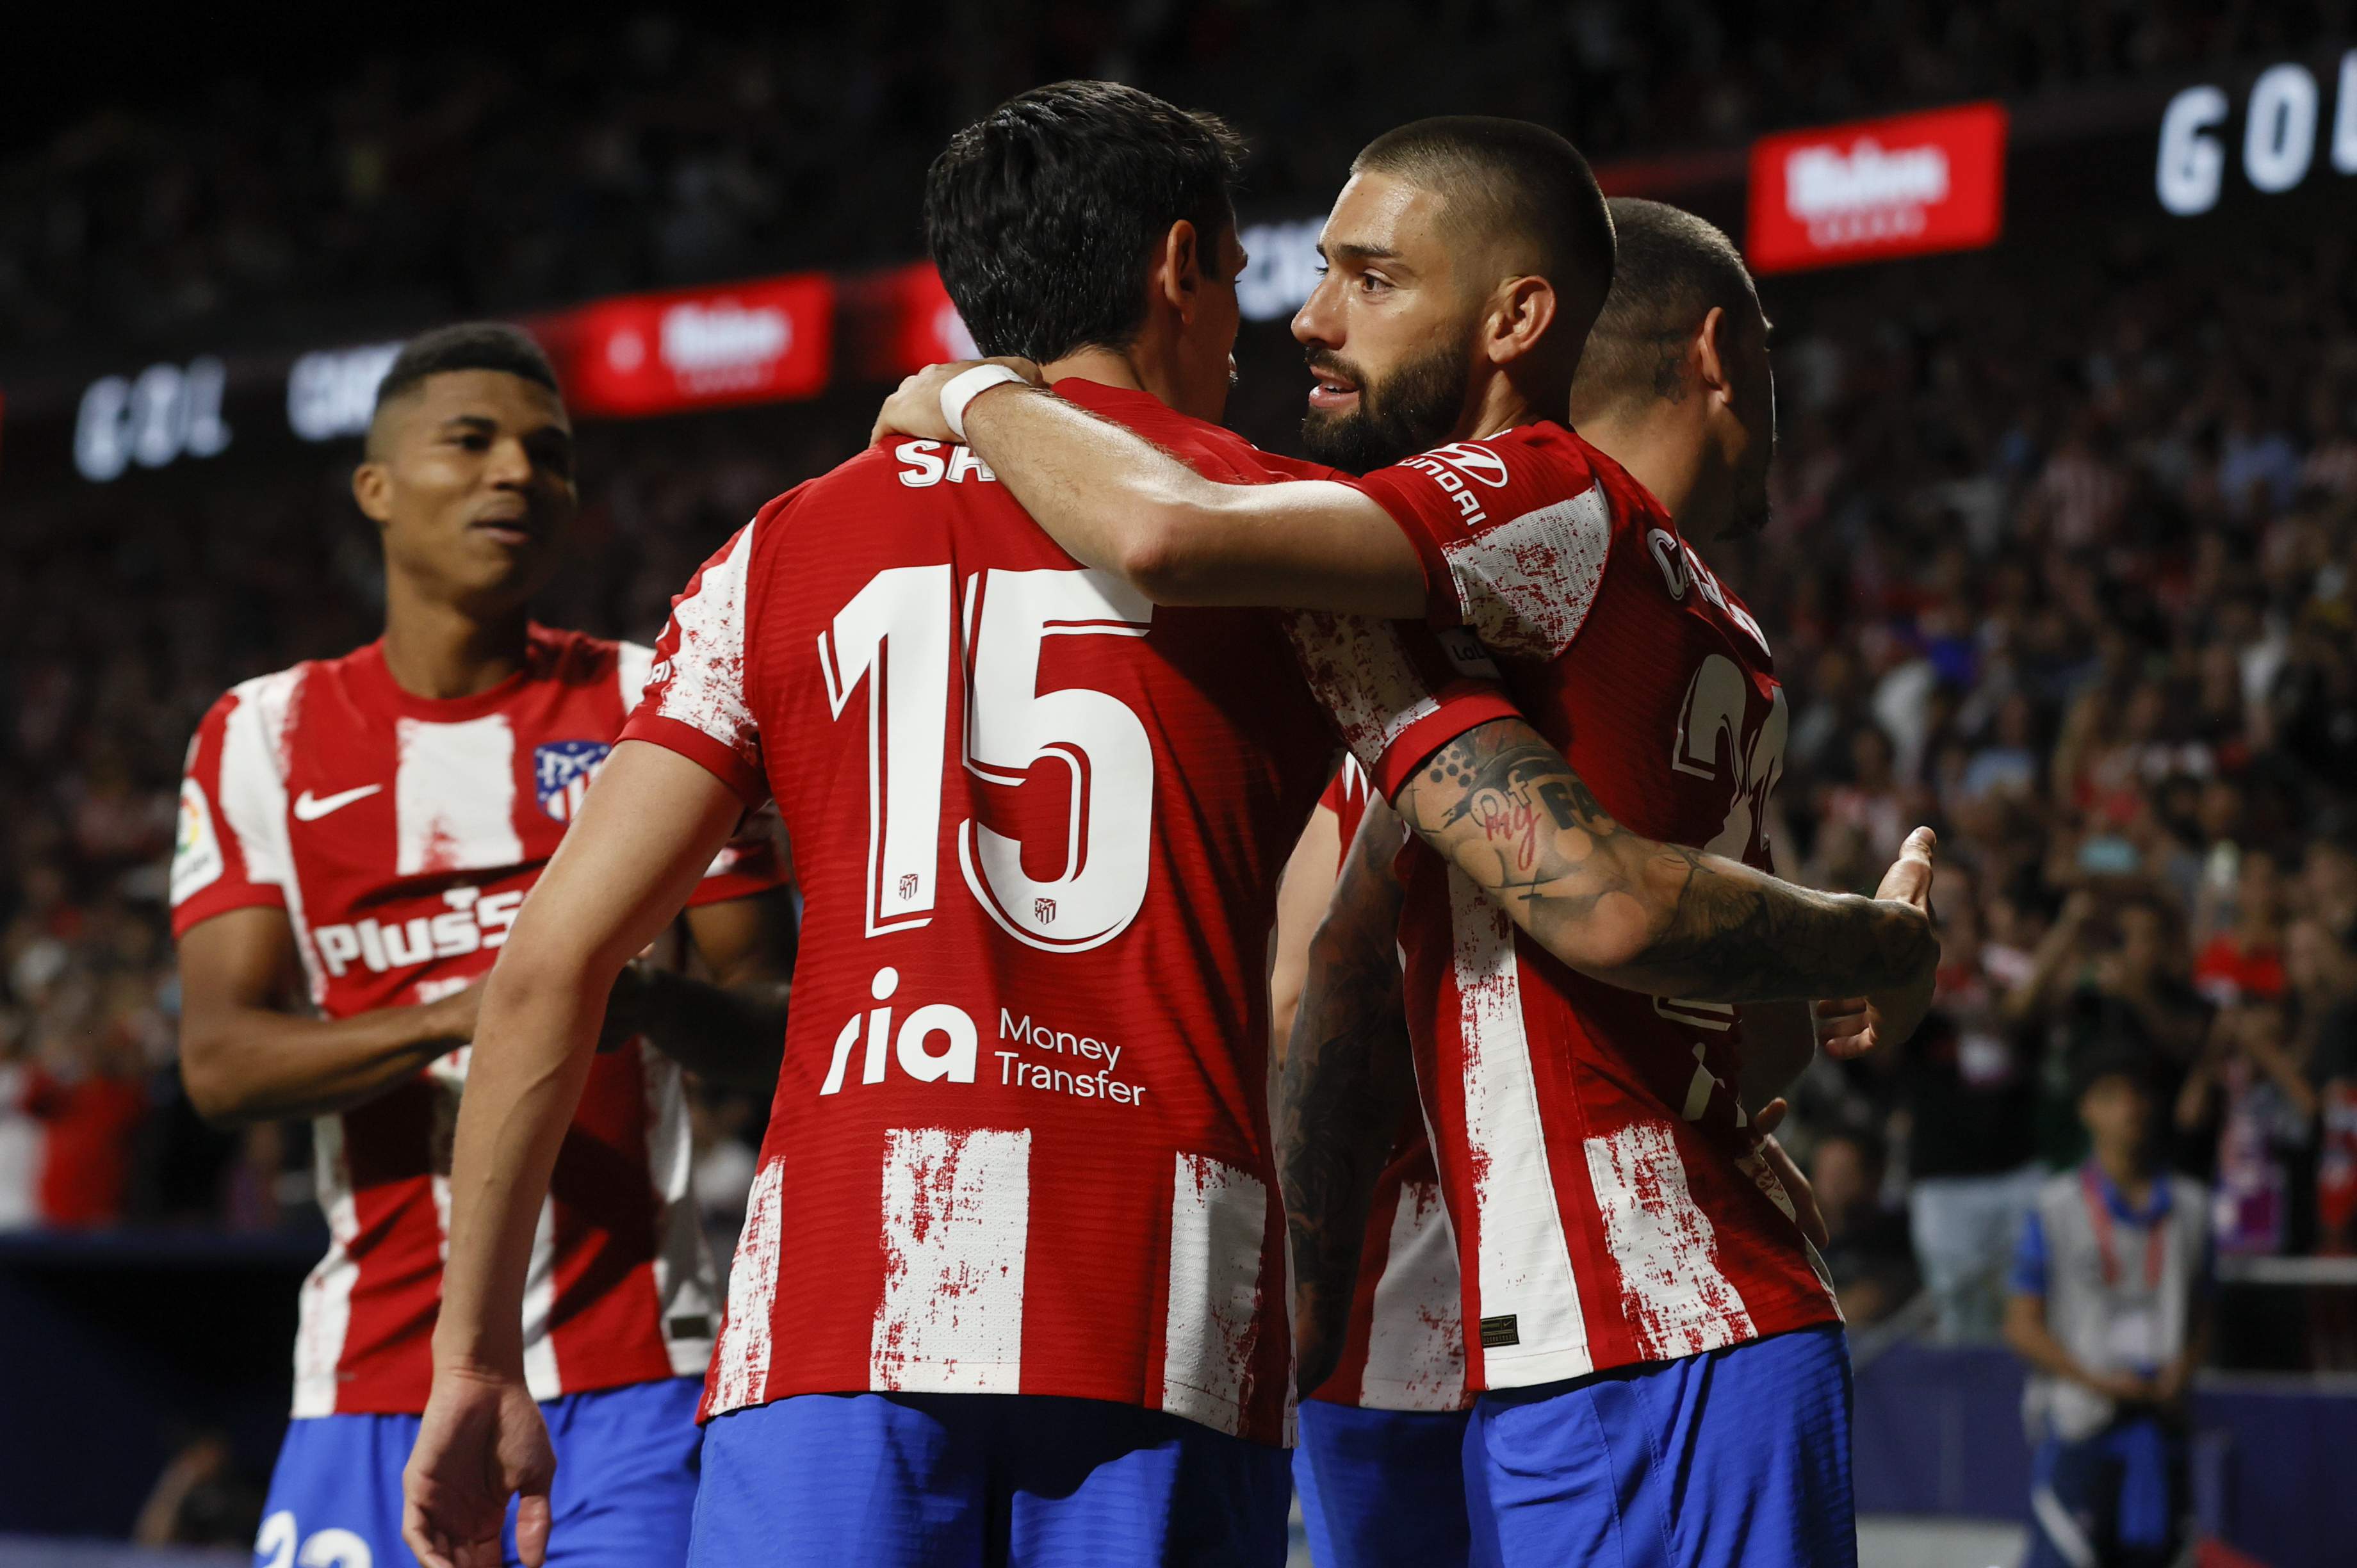 La Liga: Atletico beat Real Madrid to win the MADRID DERBY, Yannick Carrasco scores the winner from the penalty spot, Watch Atletico Madrid beat Real Madrid HIGHLIGHTS